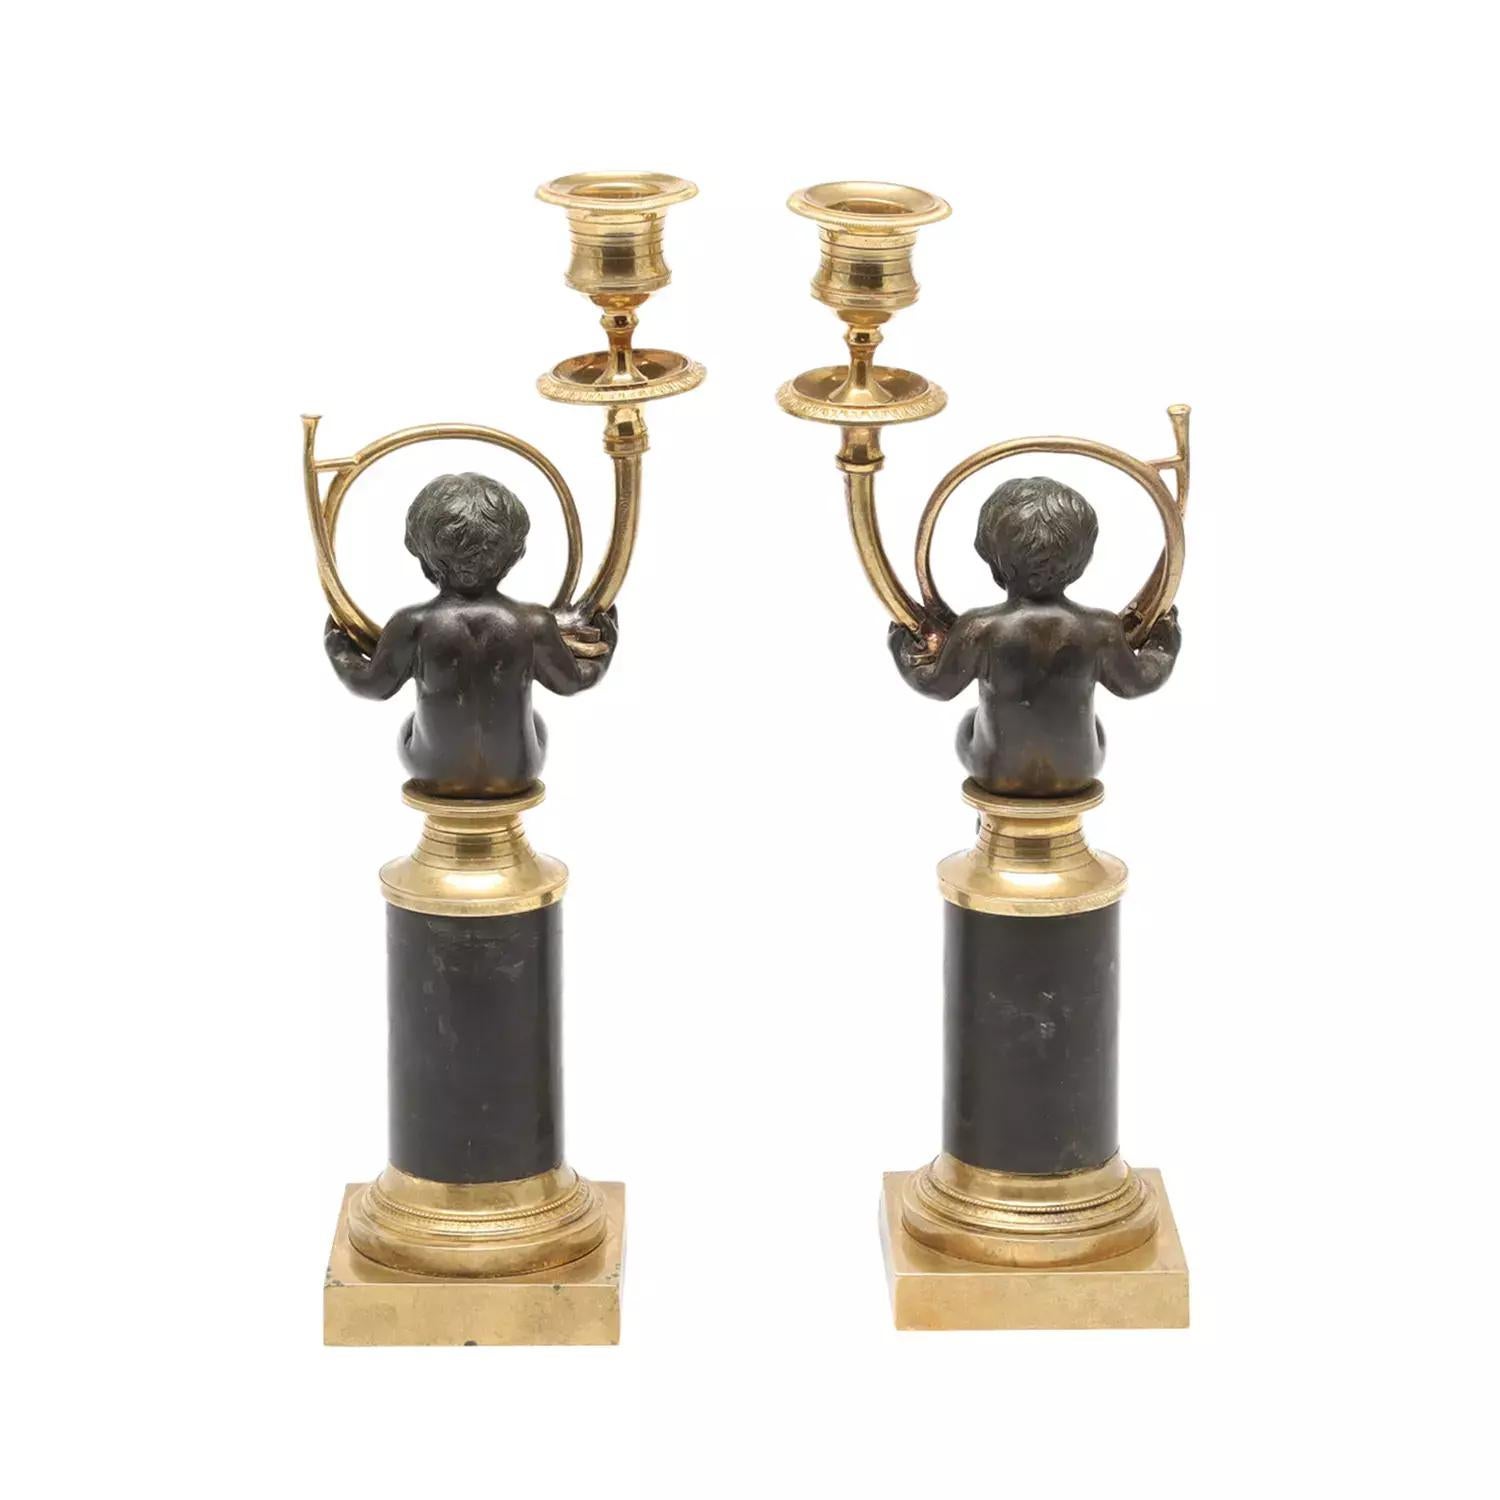 A gold-black, antique French pair of 